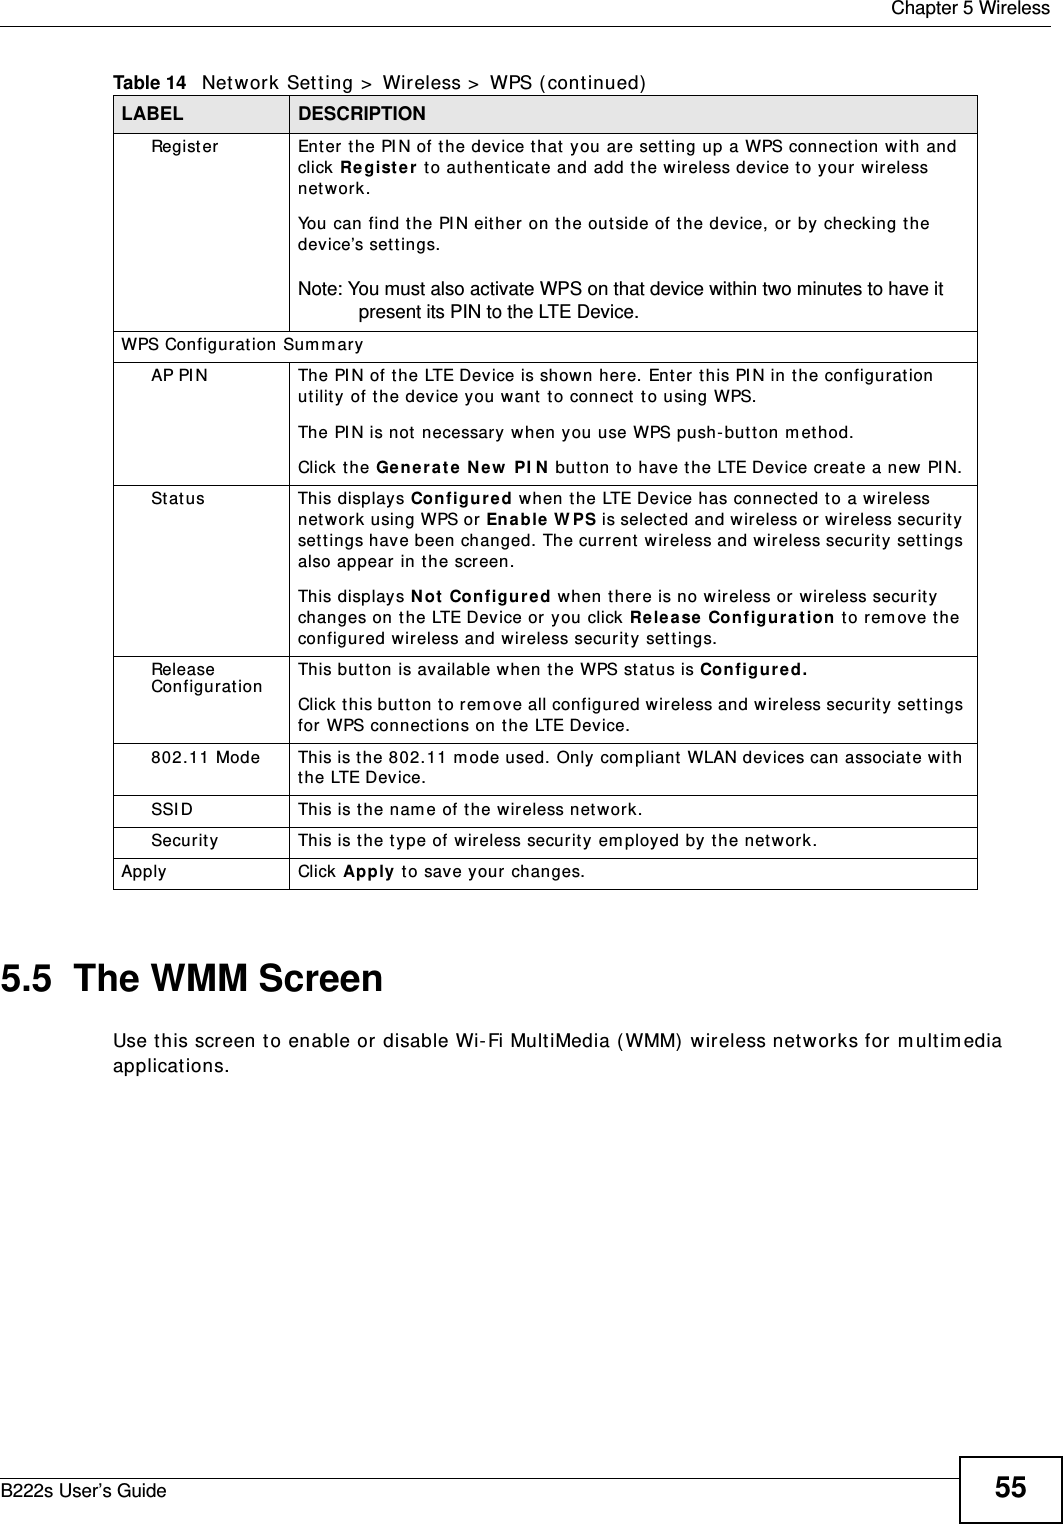  Chapter 5 WirelessB222s User’s Guide 555.5  The WMM ScreenUse t his screen t o enable or disable Wi- Fi MultiMedia ( WMM)  wireless networks for m ult im edia applications.Regist er Enter t he PI N of the device t hat  you are set t ing up a WPS connect ion wit h and click Re g ist e r  t o aut hent icat e and add t he wireless device t o your w ireless net work.You can find t he PI N either on t he out side of t he device, or by  checking t he device’s set t ings.Note: You must also activate WPS on that device within two minutes to have it present its PIN to the LTE Device.WPS Configurat ion Sum maryAP PI N The PI N of the LTE Device is shown here. Enter this PI N in t he configuration ut ility of t he device you want  t o connect  t o using WPS.The PI N is not  necessary when you use WPS push- but t on m et hod.Click t he Gene r at e  N ew  PI N  but t on t o have the LTE Device create a new PI N.St at us This displays Configure d when the LTE Device has connect ed t o a wireless net work using WPS or Enable W PS is select ed and wireless or w ireless securit y set t ings have been changed. The current  wireless and wireless securit y set t ings also appear in t he screen.This displays N ot  Con figur e d w hen t here is no wireless or wireless secur ity changes on t he LTE Device or you click Re le a se Configur a t ion  t o rem ove t he configured wireless and wir eless securit y sett ings.Release ConfigurationThis but ton is available when t he WPS stat us is Con figu re d.Click t his but t on t o rem ove all configured wireless and wir eless securit y set tings for WPS connect ions on the LTE Device.802.11 Mode This is t he 802.11 m ode used. Only com pliant WLAN devices can associate wit h the LTE Device.SSI D This is t he nam e of t he wireless netw ork.Securit y This is t he t ype of wireless securit y em ployed by t he net work.Apply Click Apply t o save your  changes.Table 14   Network Sett ing &gt;  Wireless &gt;  WPS ( cont inued)LABEL DESCRIPTION